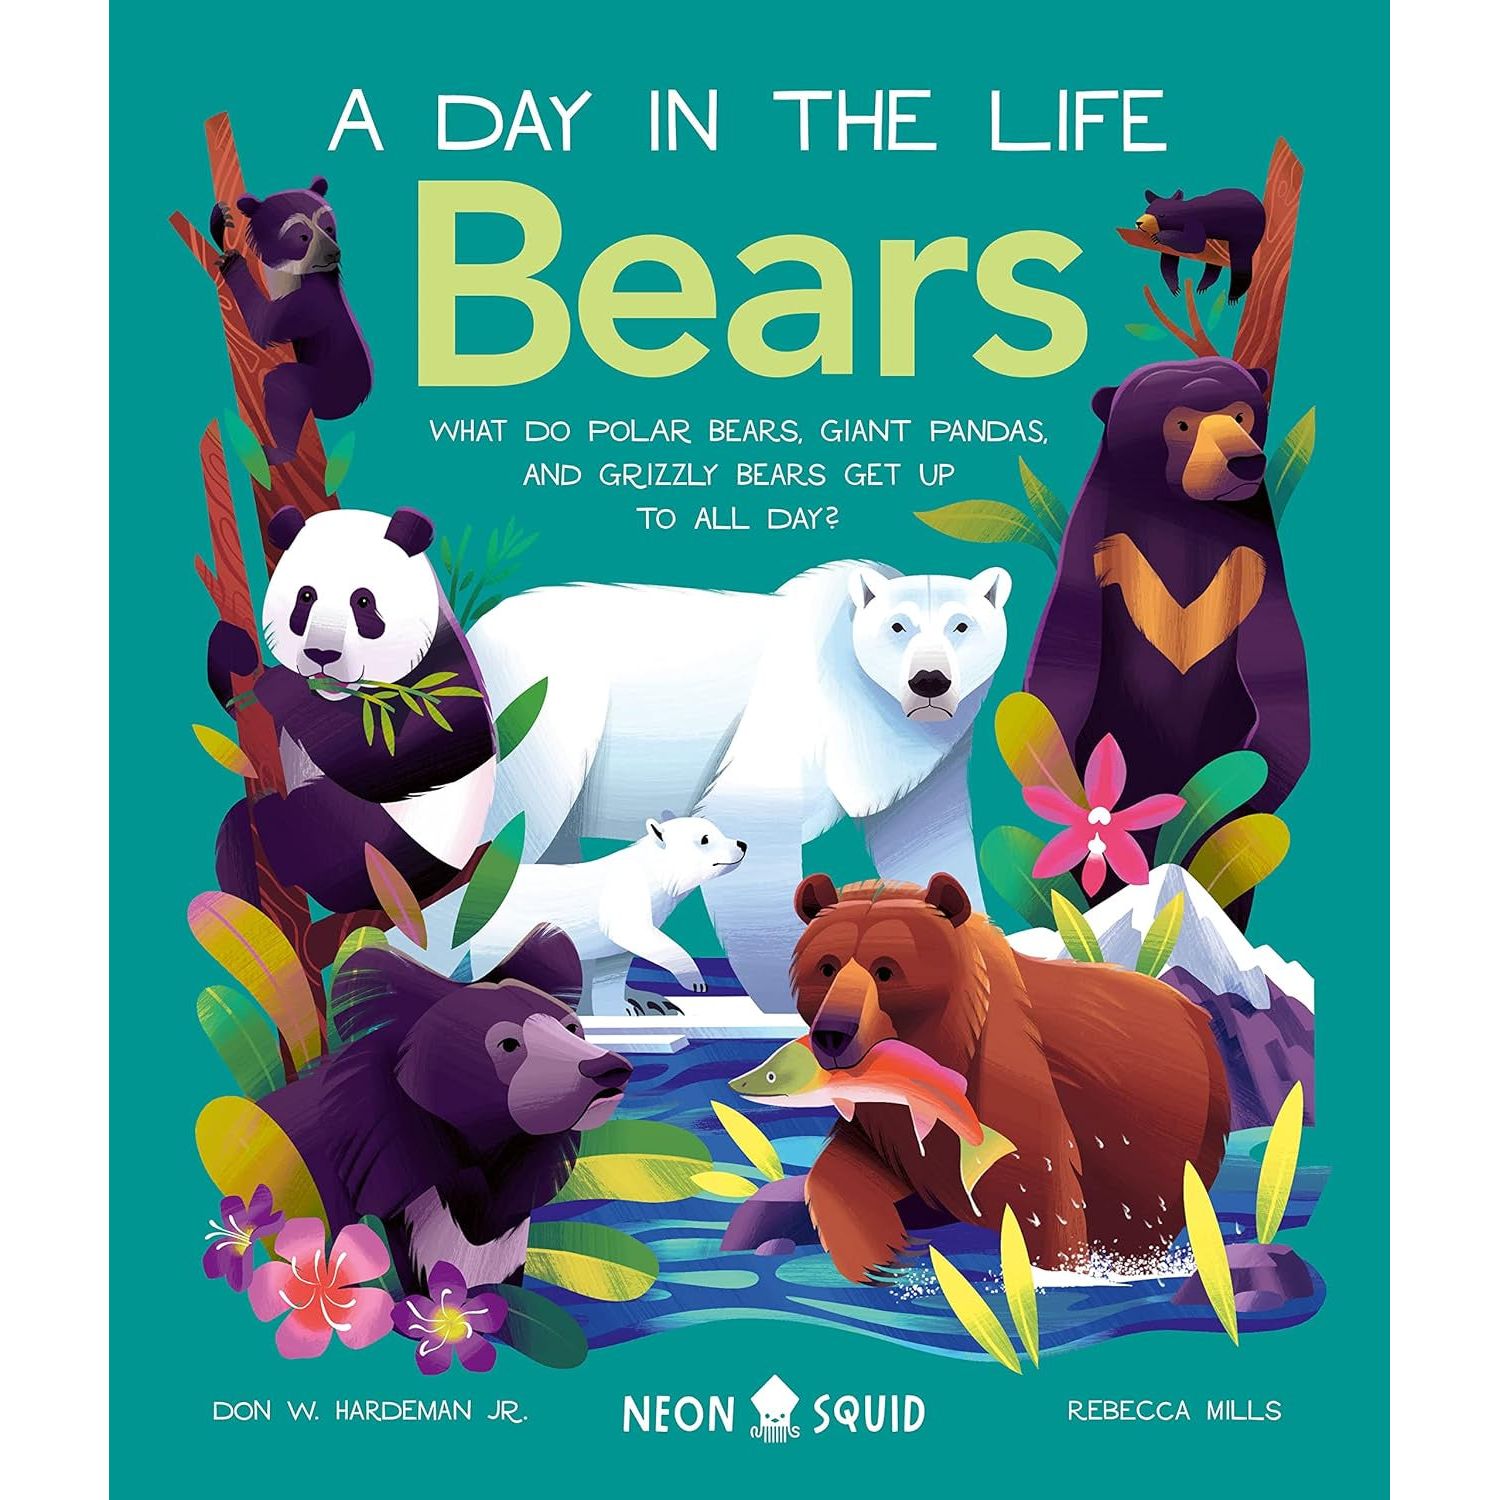 Bears (A Day in the Life)